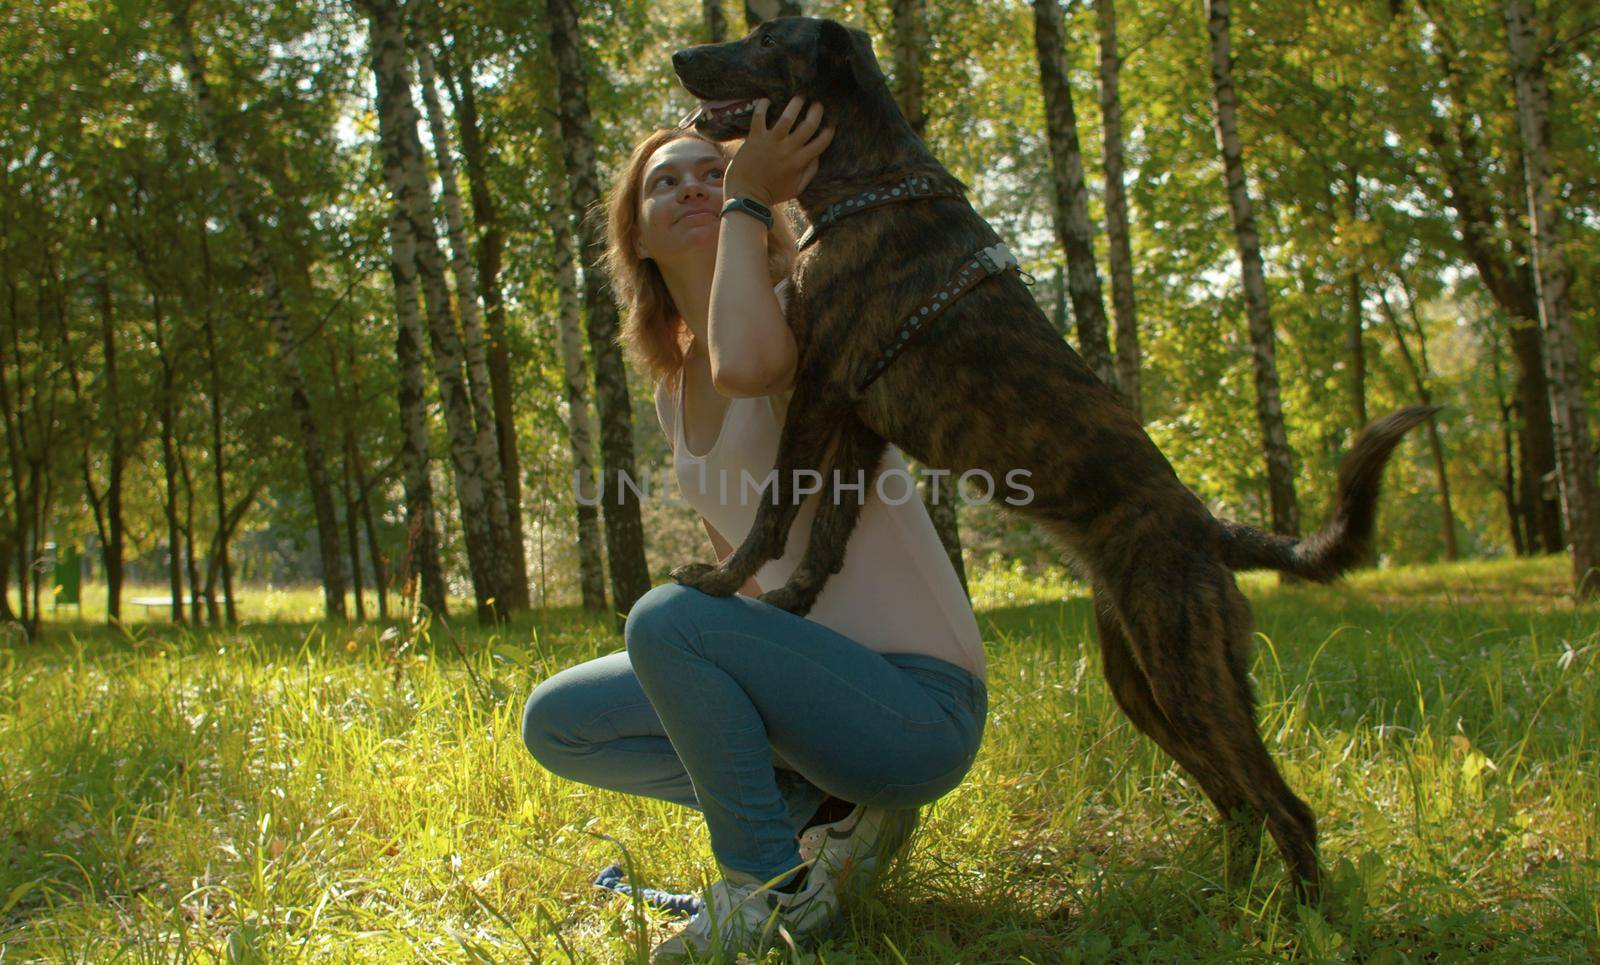 Dog and its owner sitting in the park. Dog place its front paws on the woman's knees